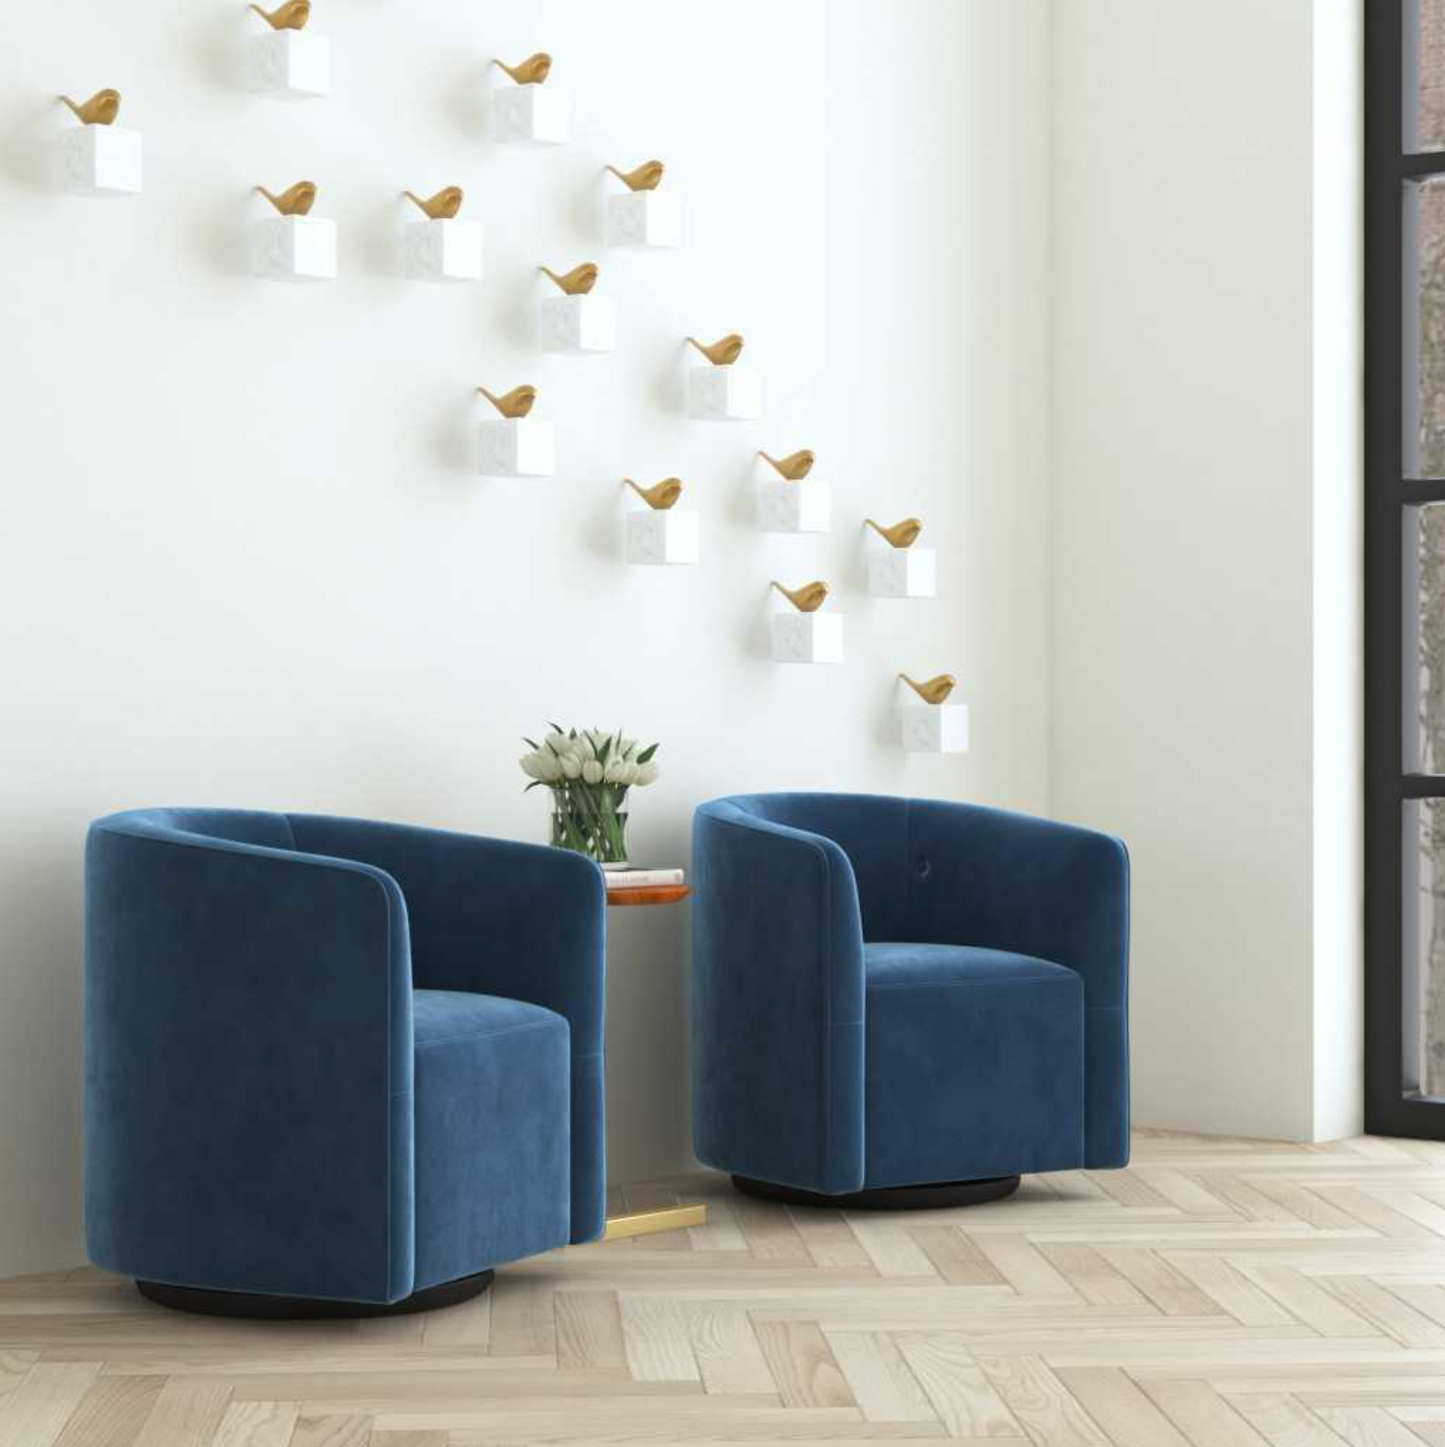 Flying Solo Wall Decor